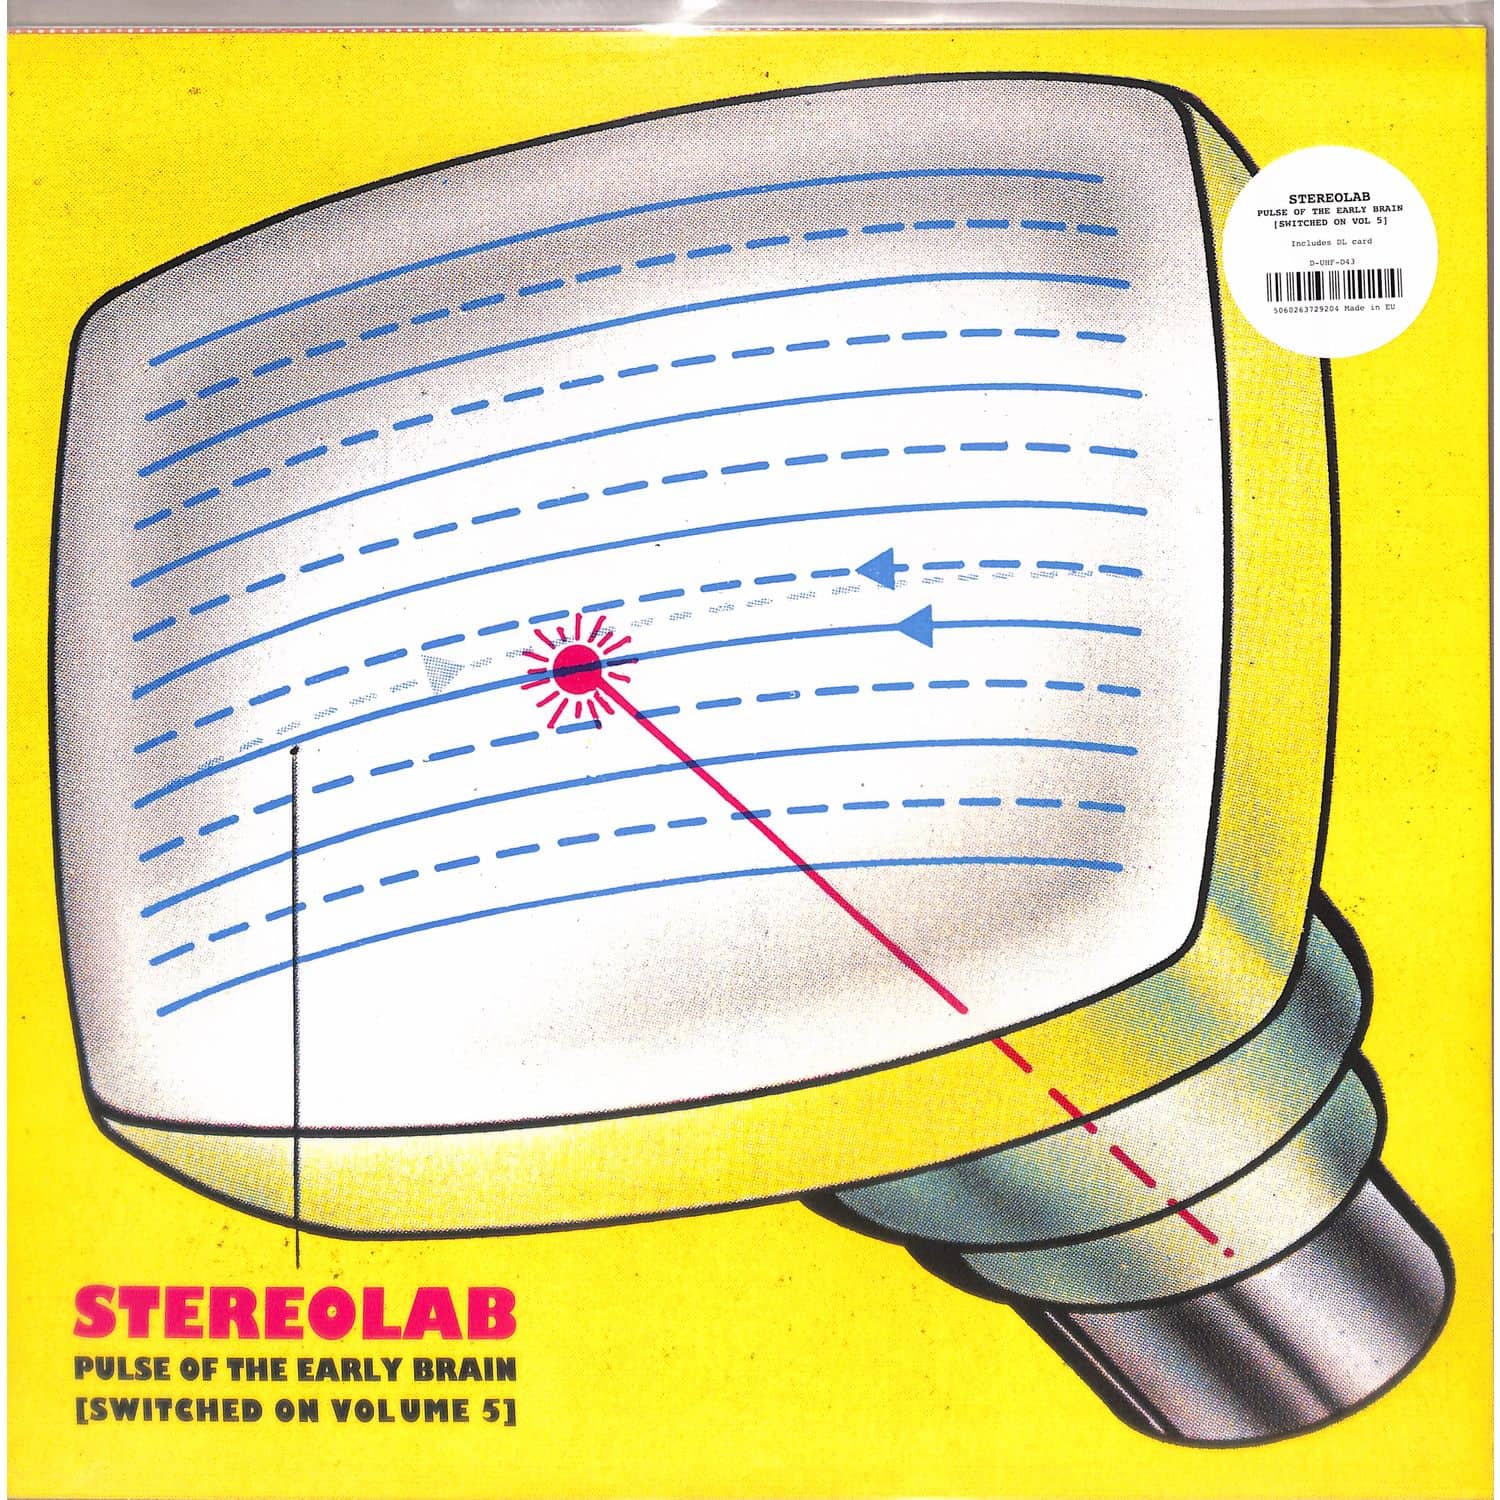 Stereolab - PULSE OF THE EARLY BRAIN SWITCHED ON 5 / REMASTER